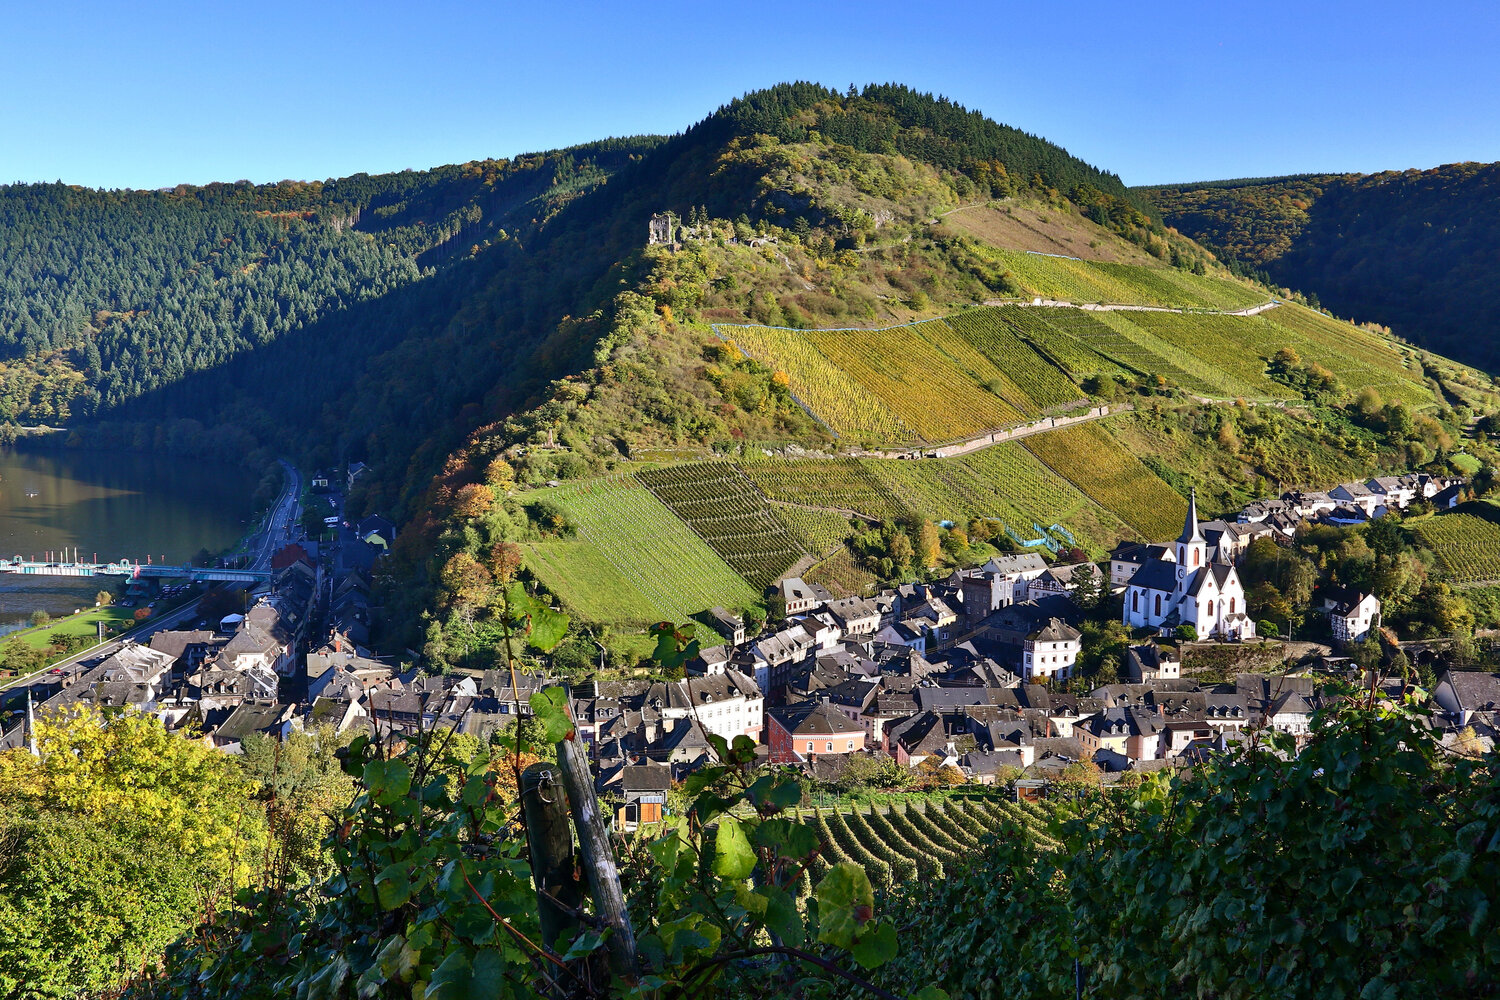 Vineyards fan out across the hills of Traben-Trarbach in the Mosel Valley near Germany’s western border.